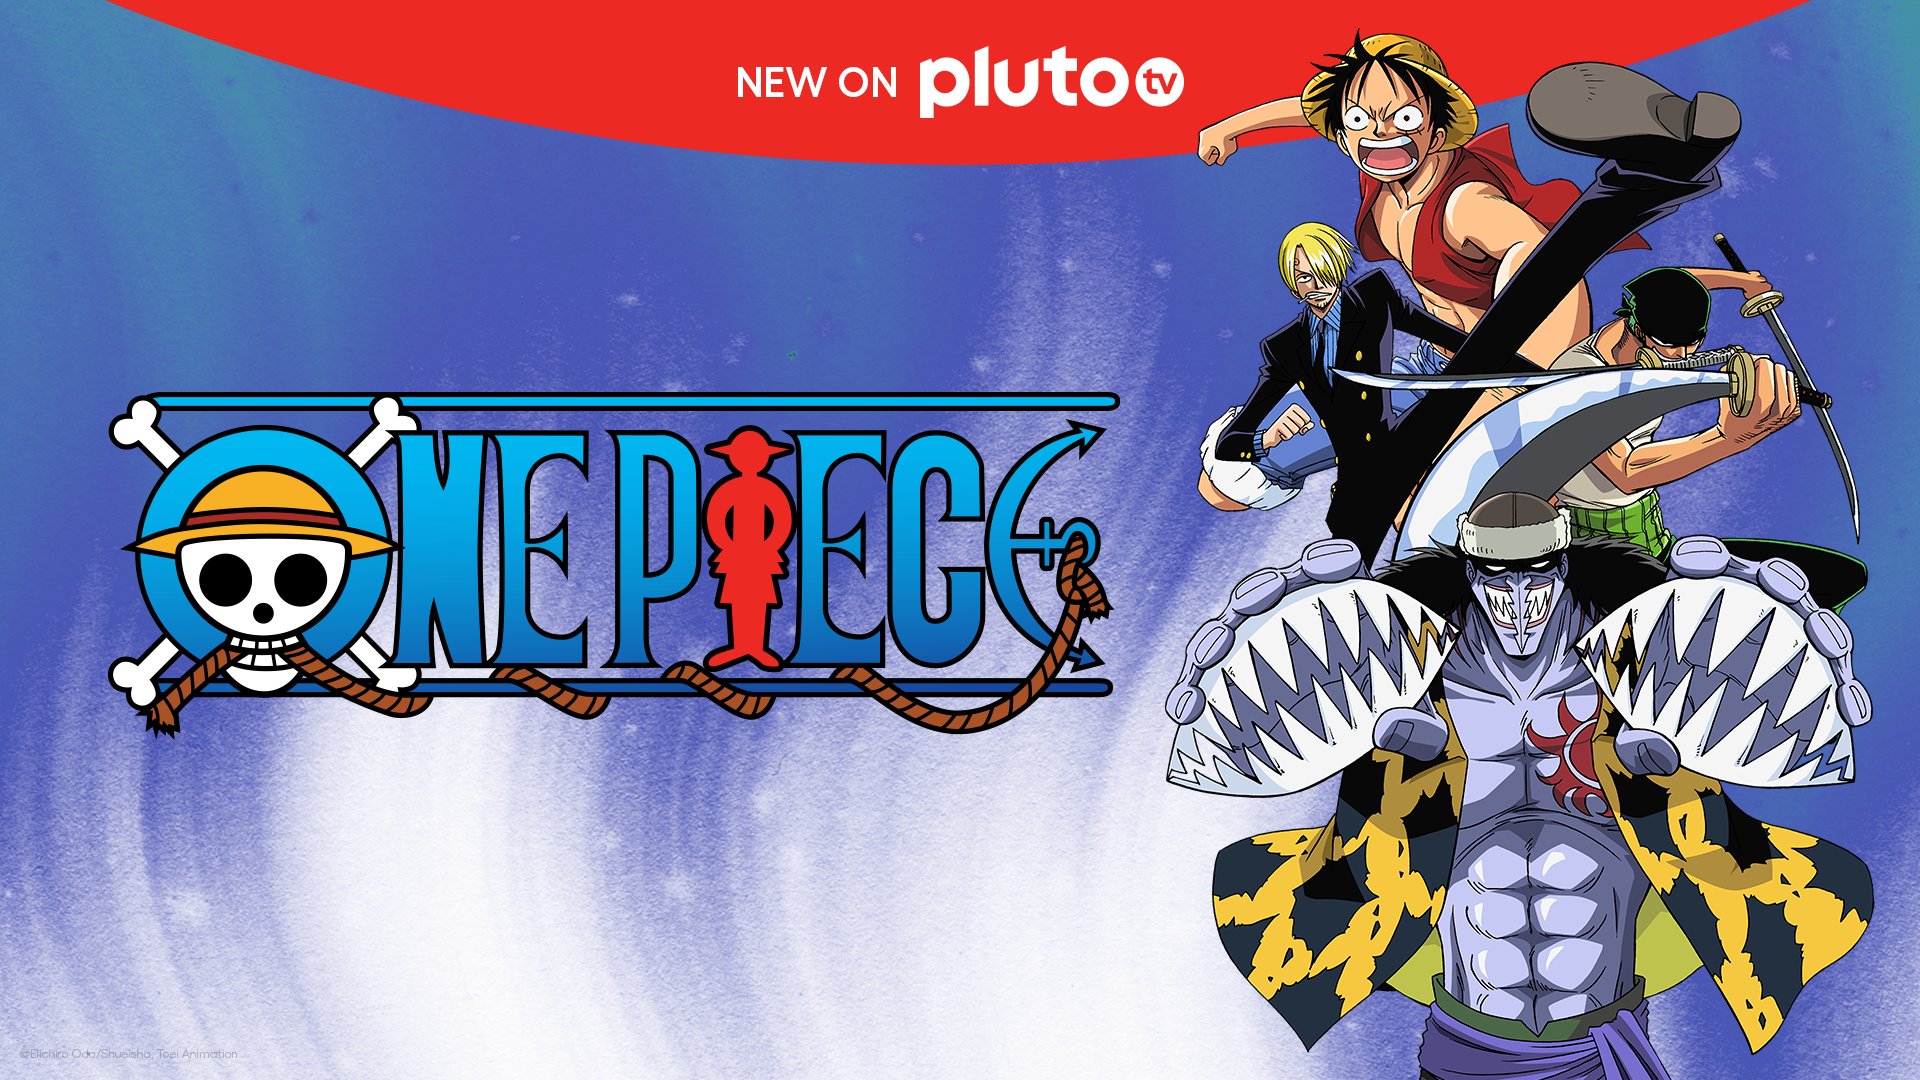 Pluto Tv The Global Anime Phenomenon Is Now A 24 7 Channel On Plutotv Join The One Piece Crew Of Straw Hat Pirates And Set A Course For Anime Adventure Ch